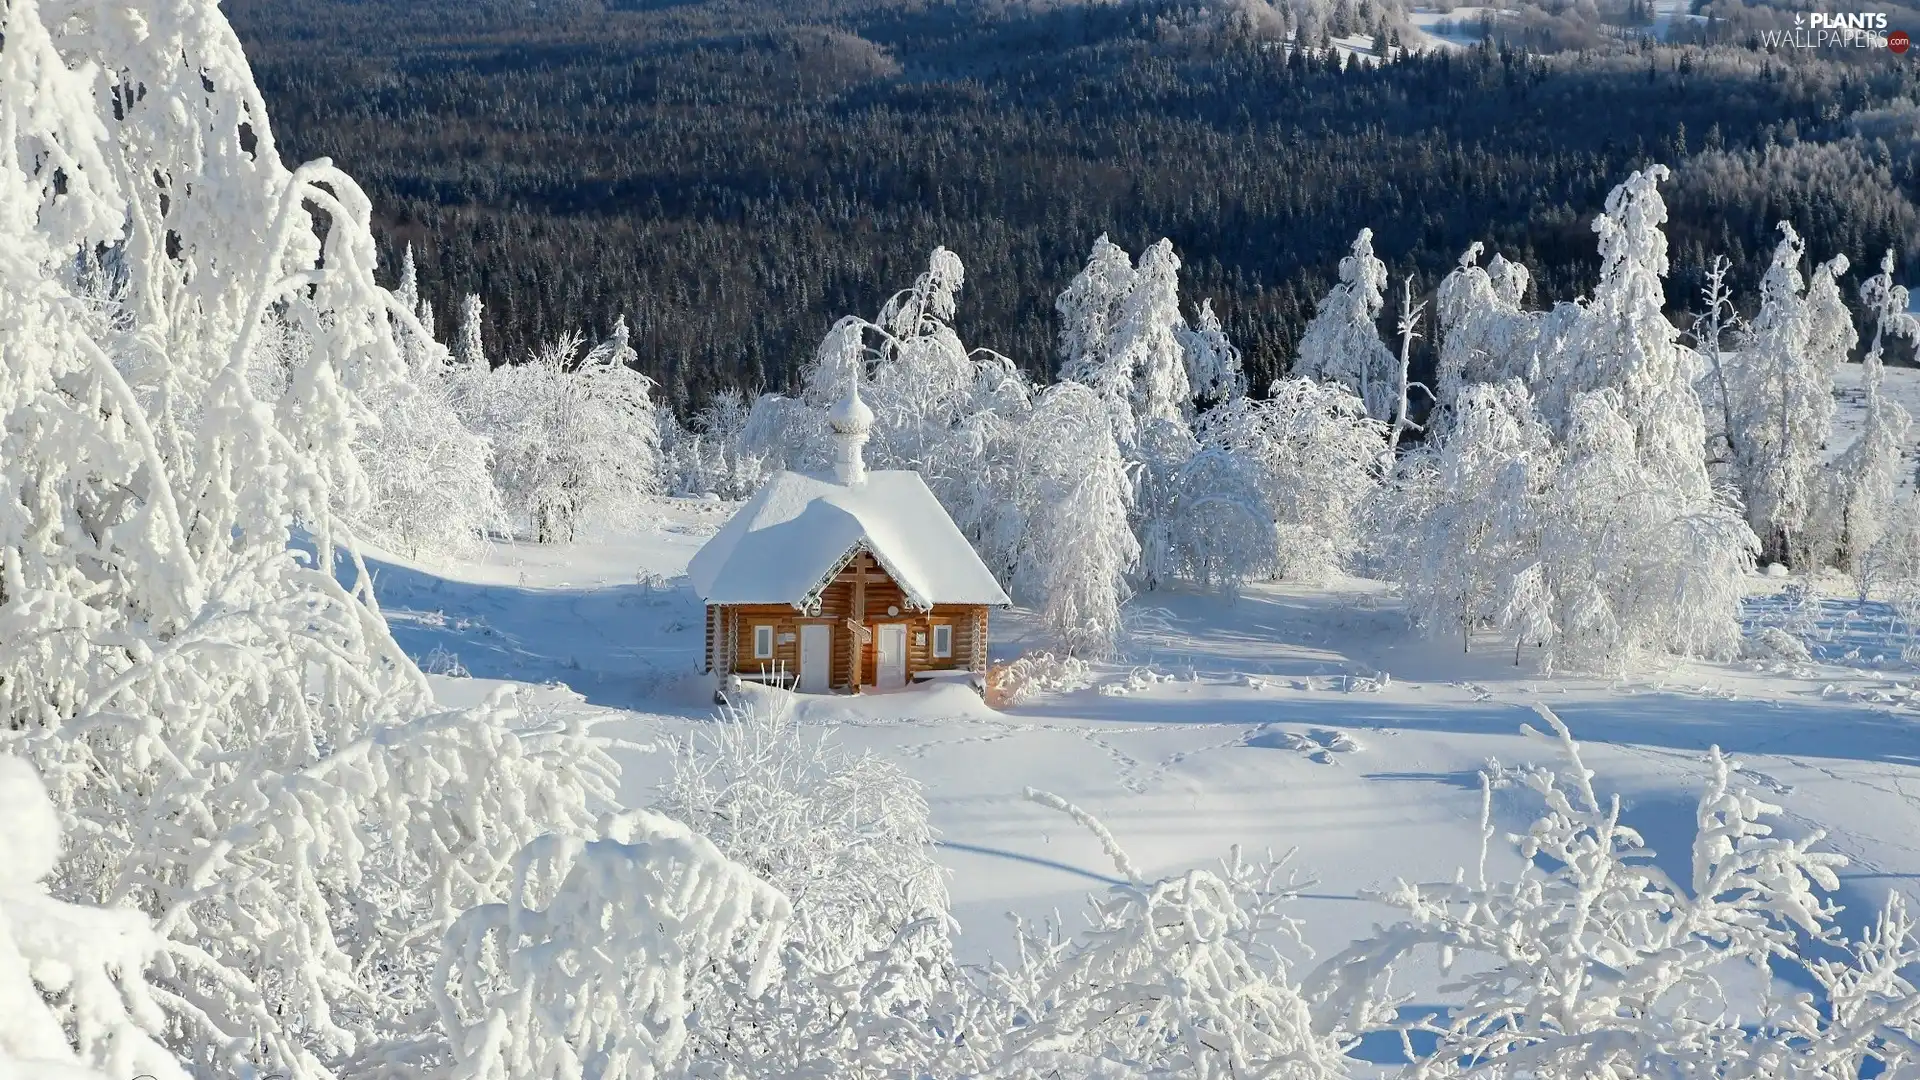 trees, viewes, snow, winter, house